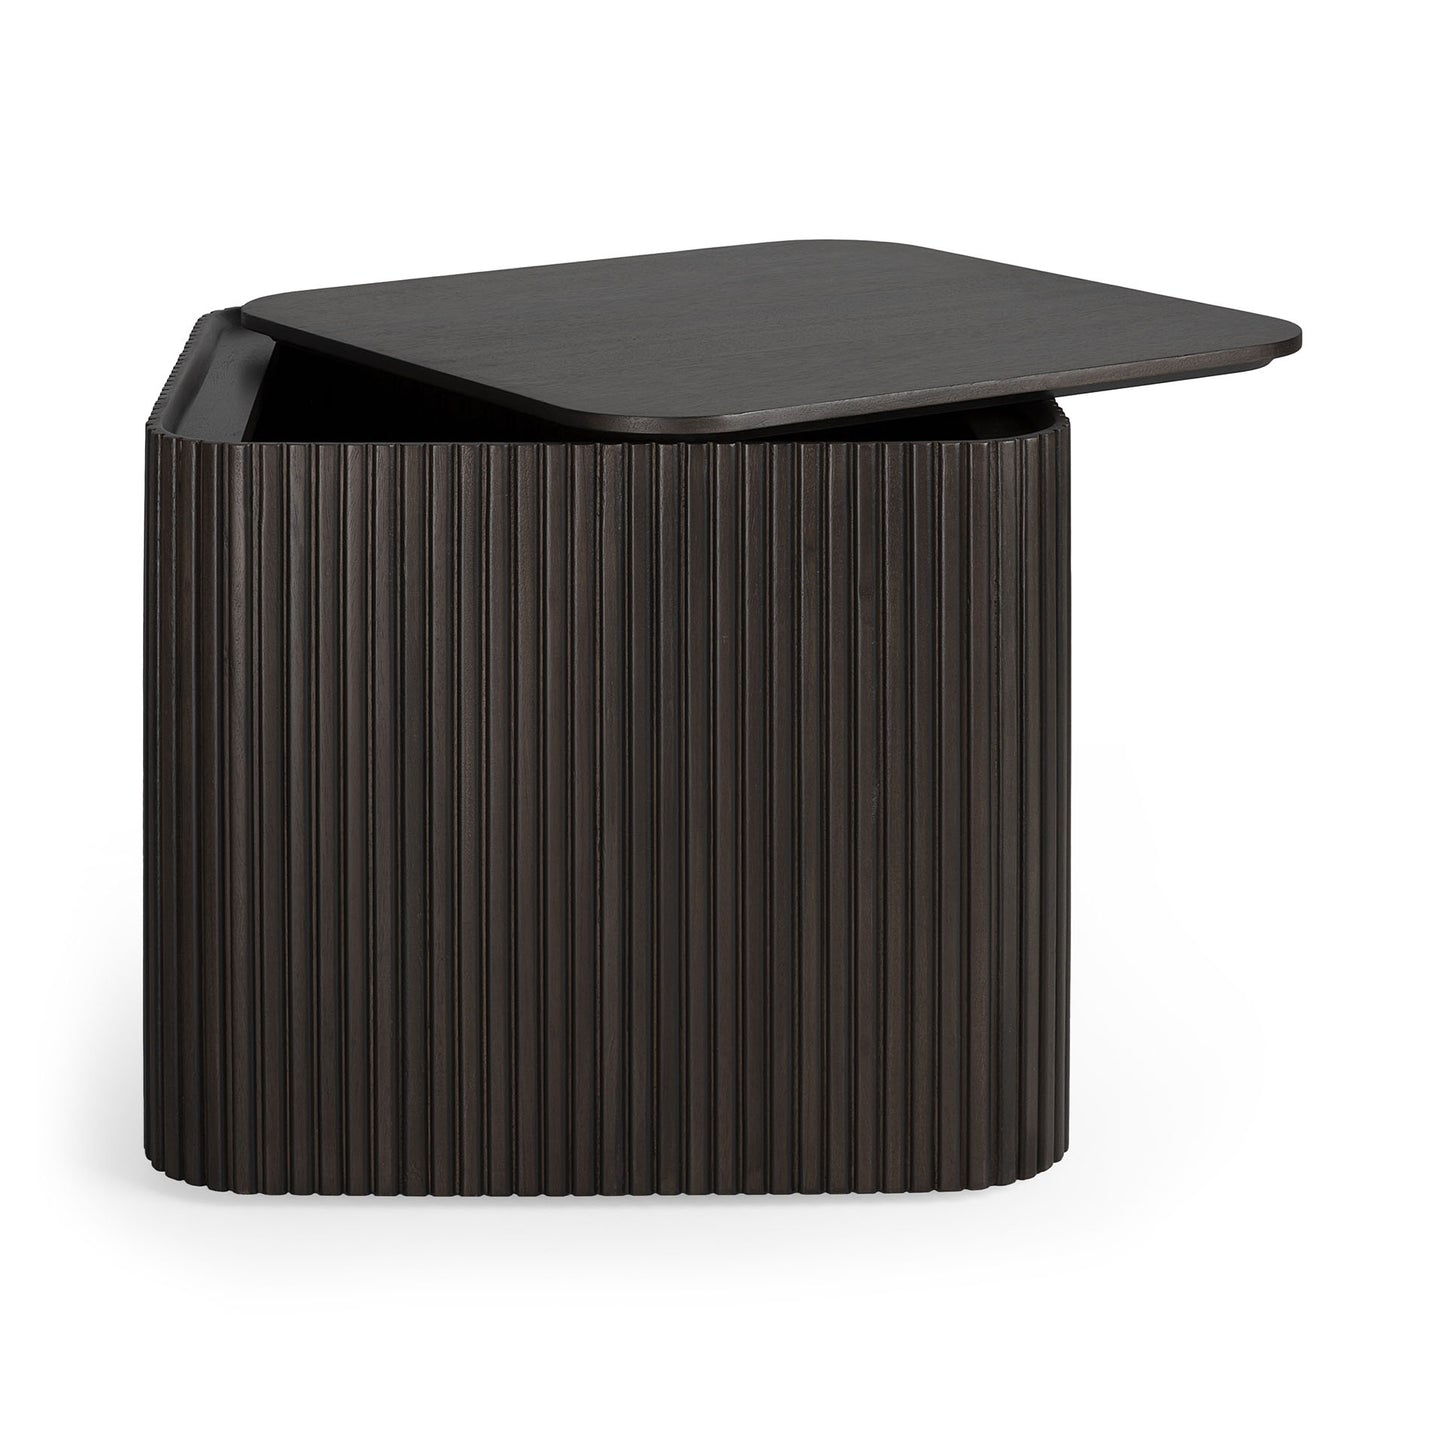 Mahogany Roller Max dark brown square side table